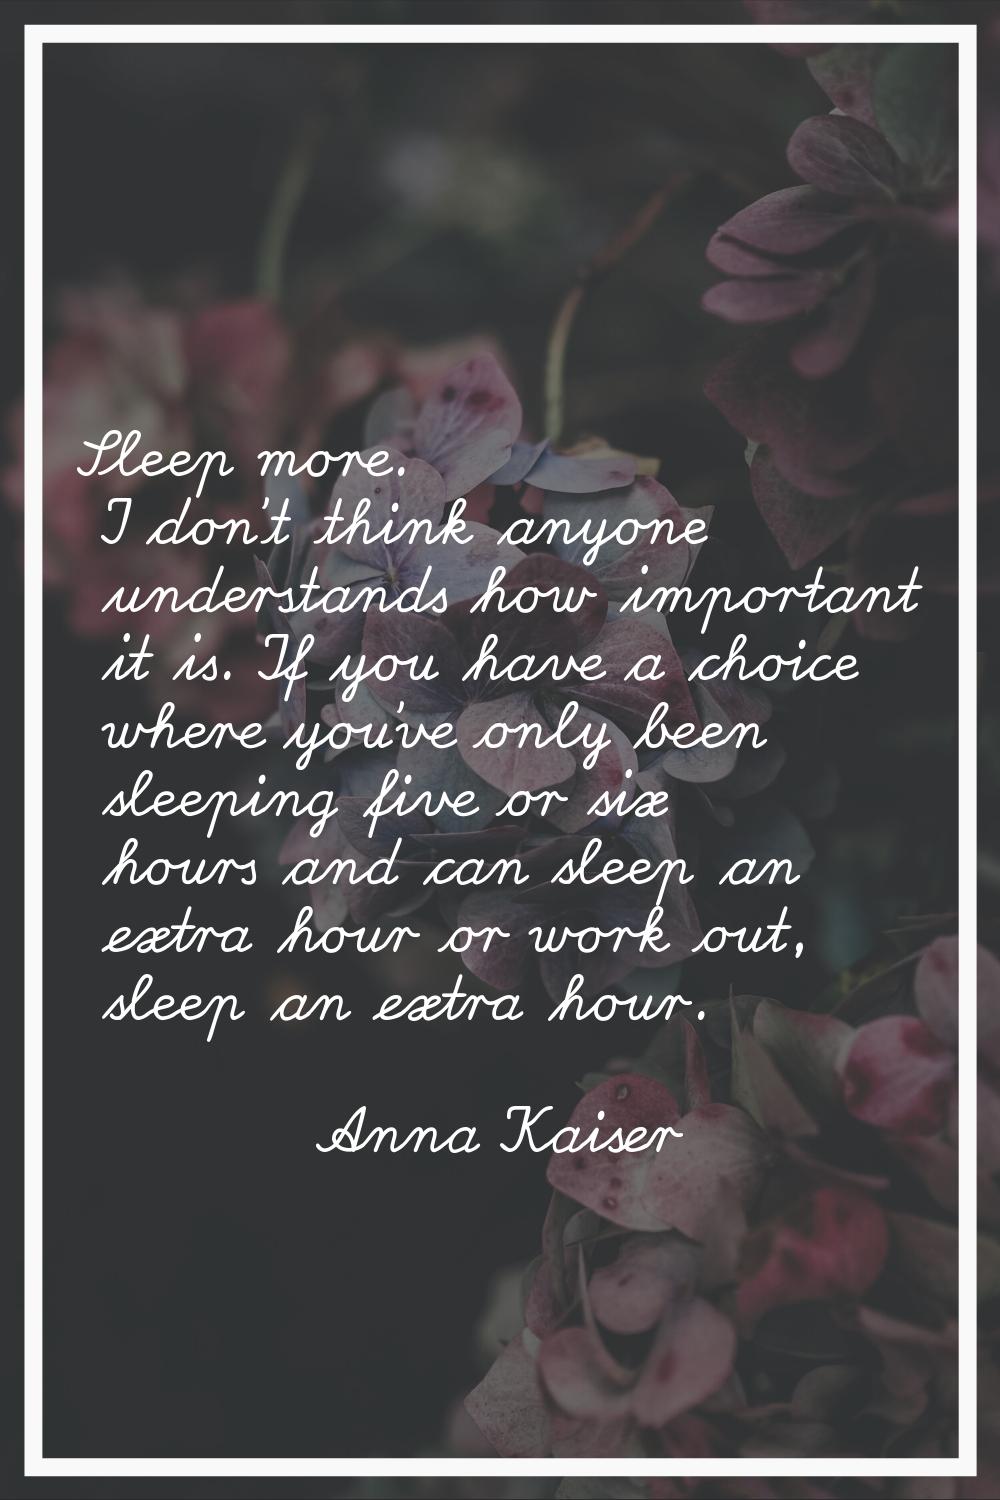 Sleep more. I don't think anyone understands how important it is. If you have a choice where you've